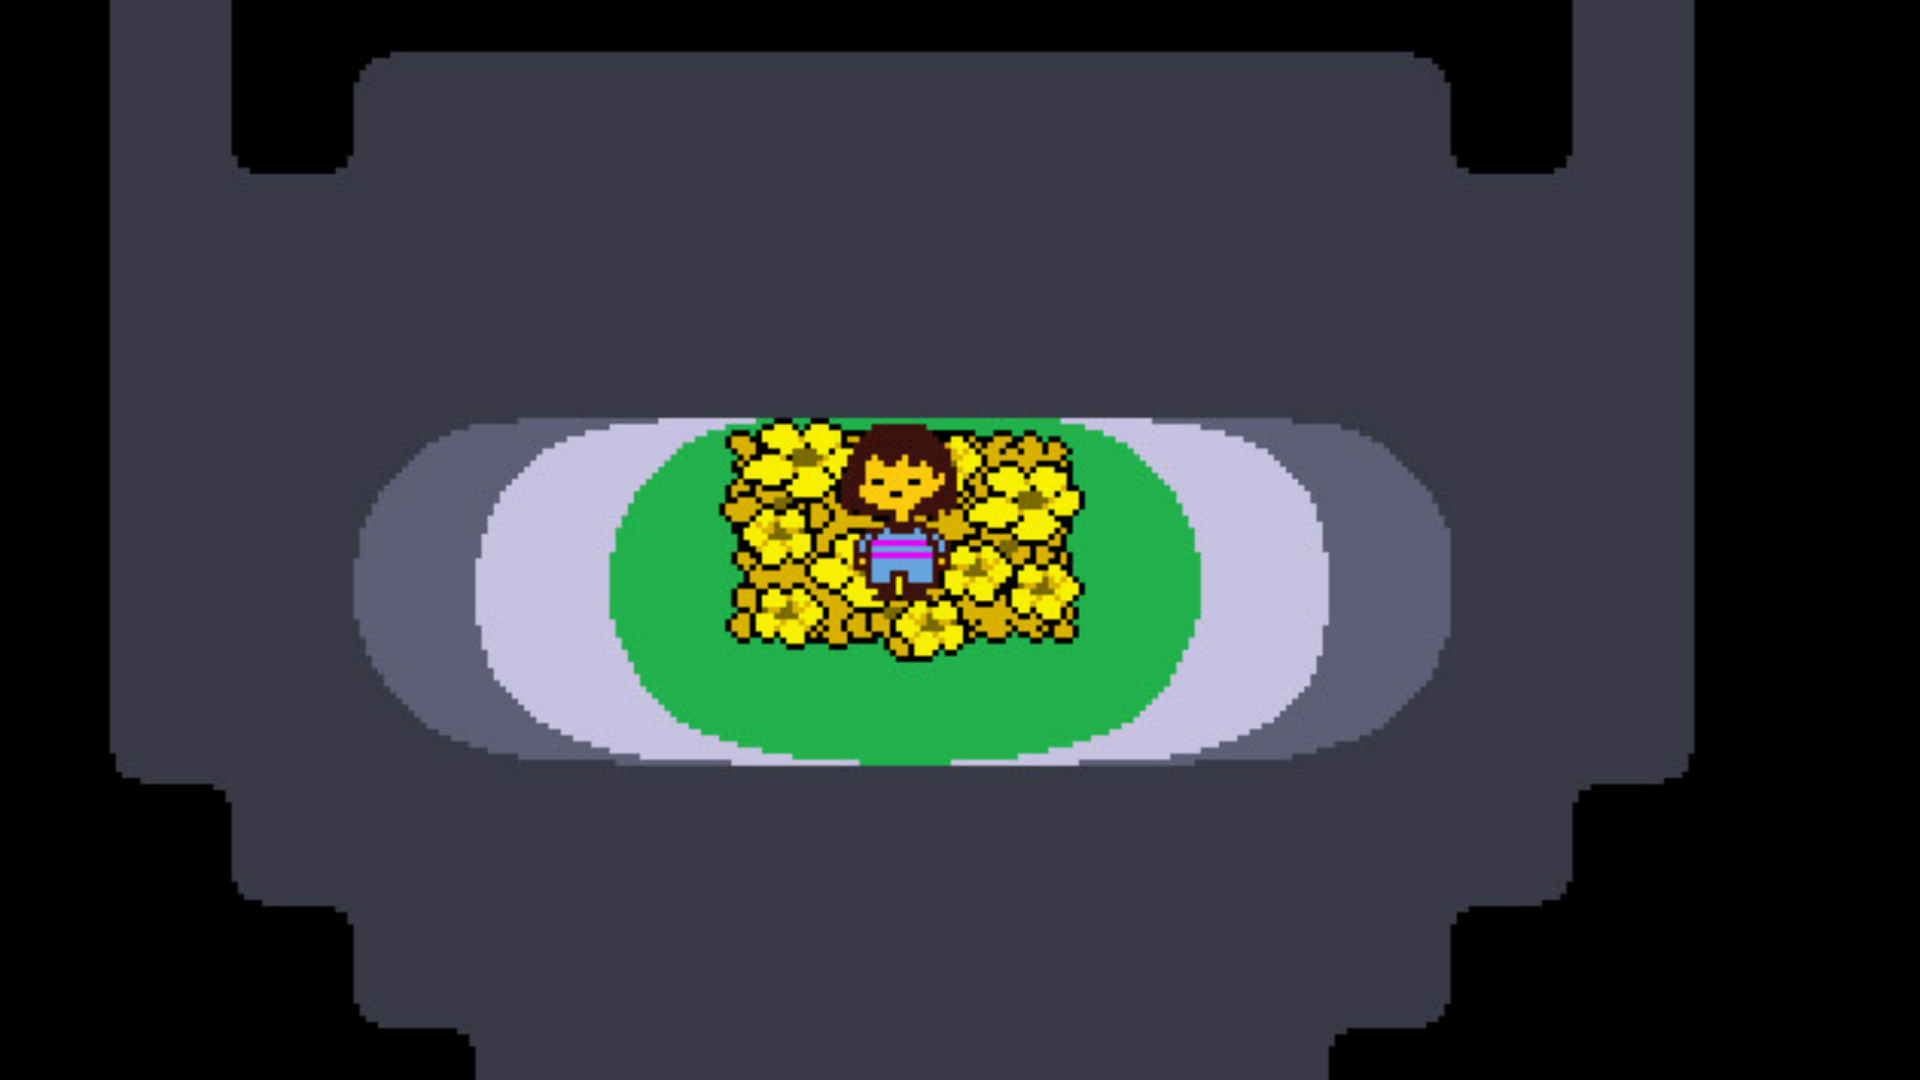 Best indie games: Undertale. Image shows a character sitting on a small island with flowers in a dark cave.